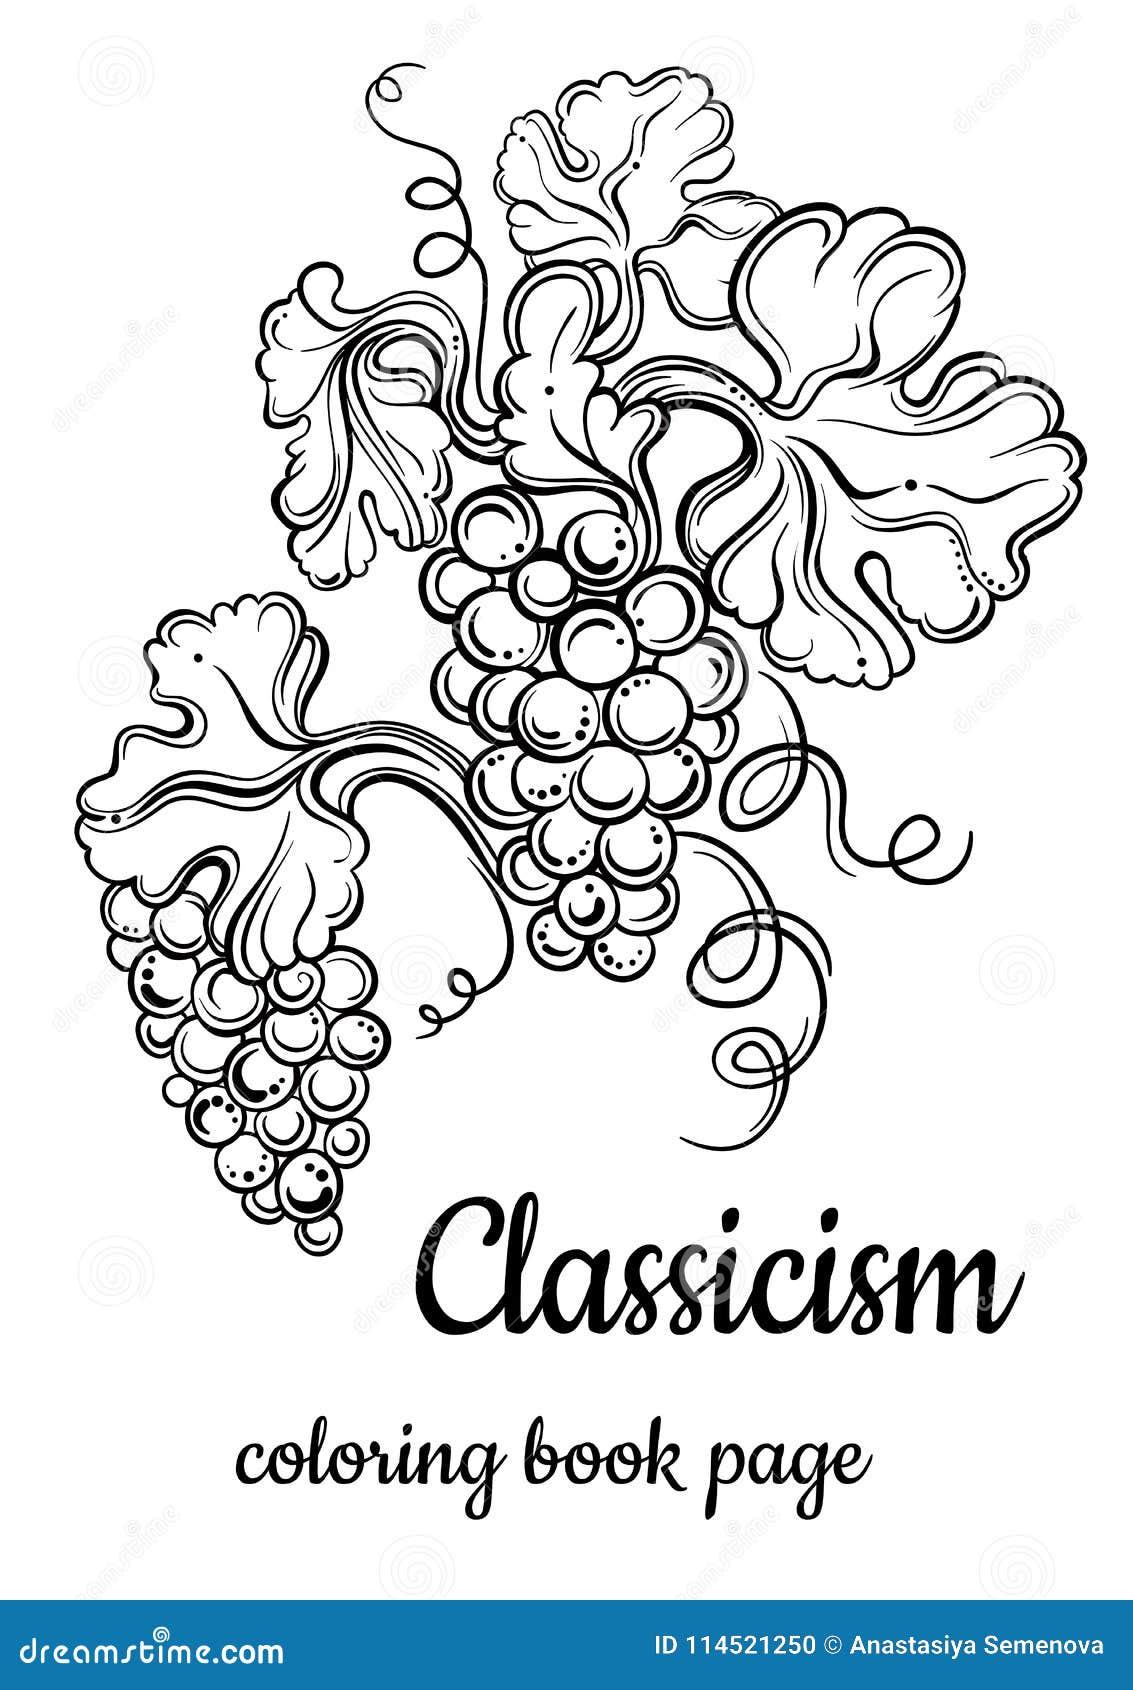   of antique decorative s. hand drawn bunch of grapes in black outlines  on white. classicism.